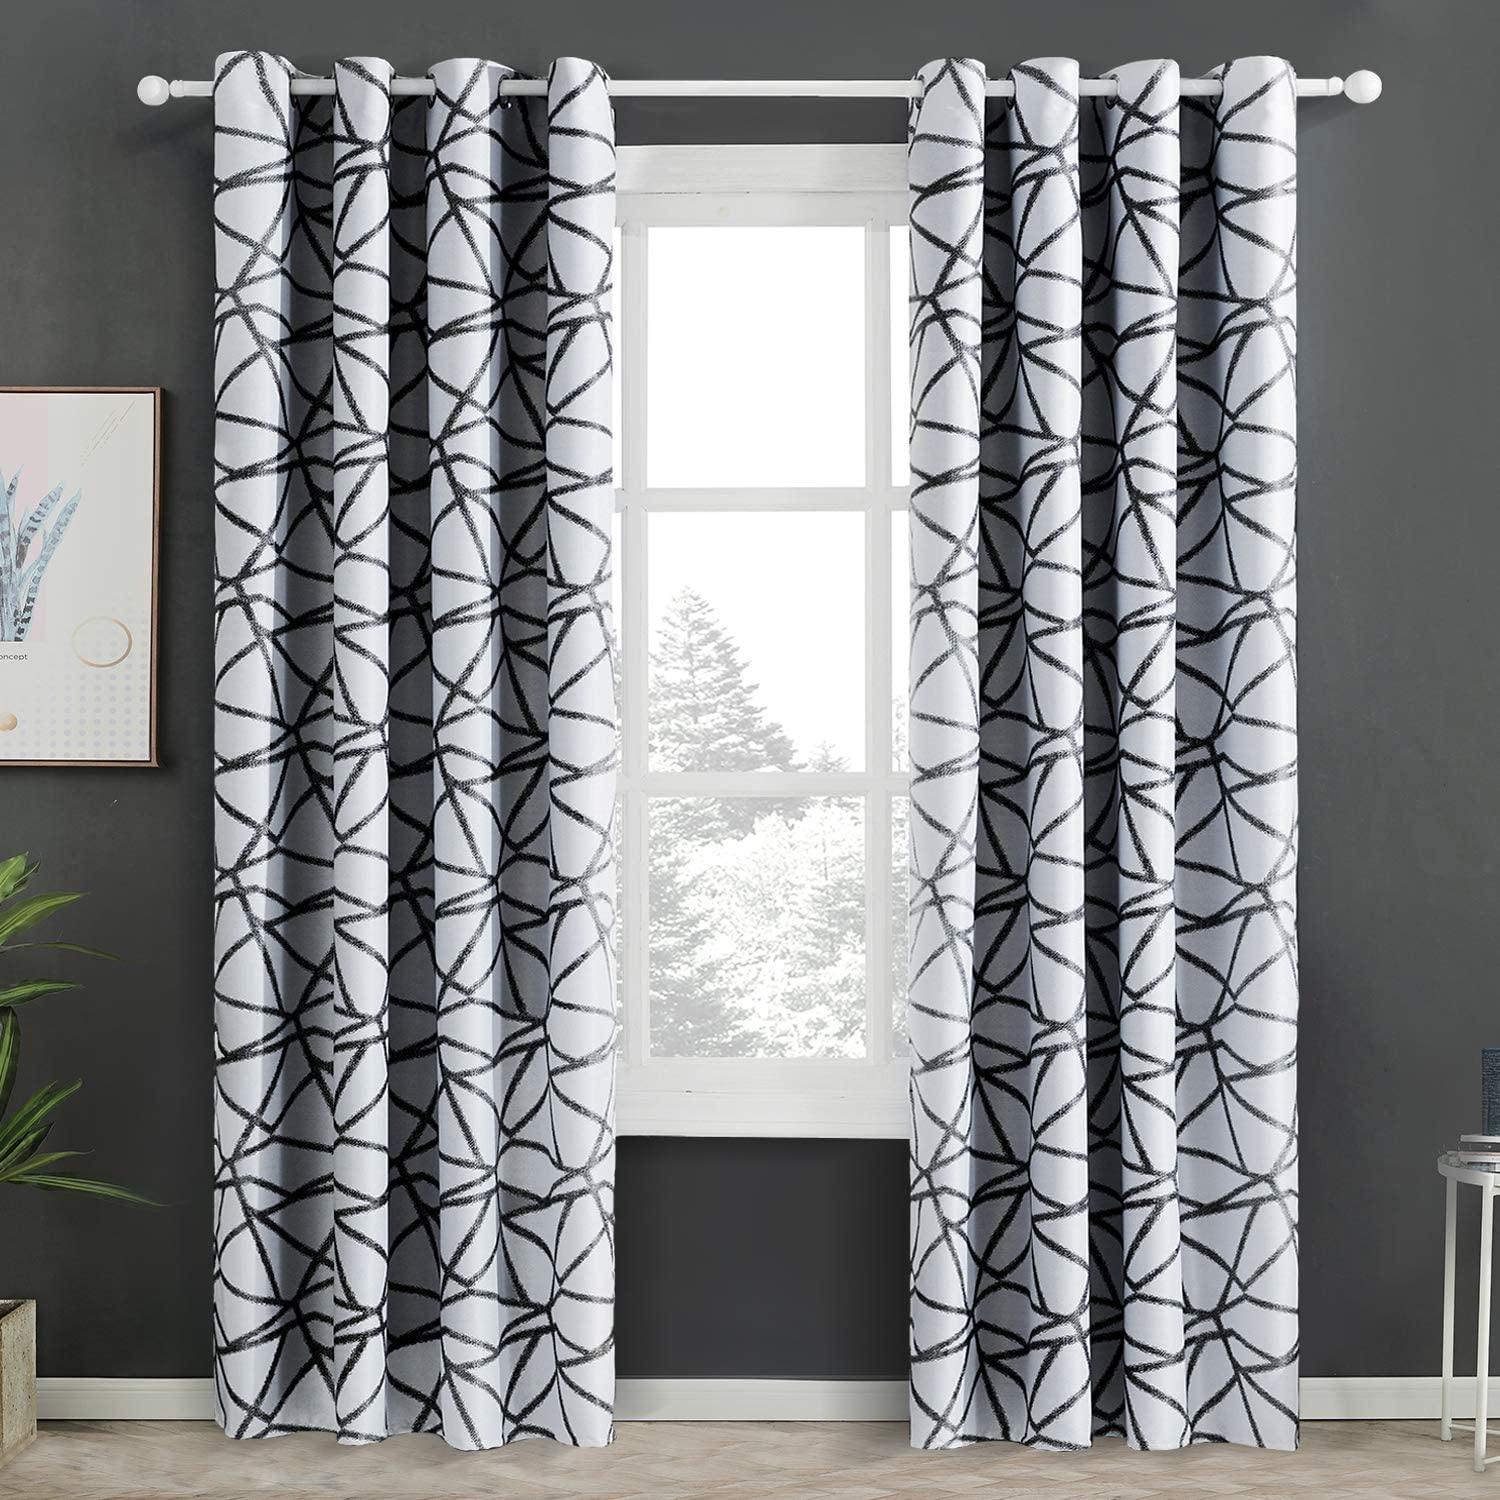 Diy Curtains - Top Printed Blackout Winter Thermal Curtains Perfect For Bedroom,1 Panel - Topfinel